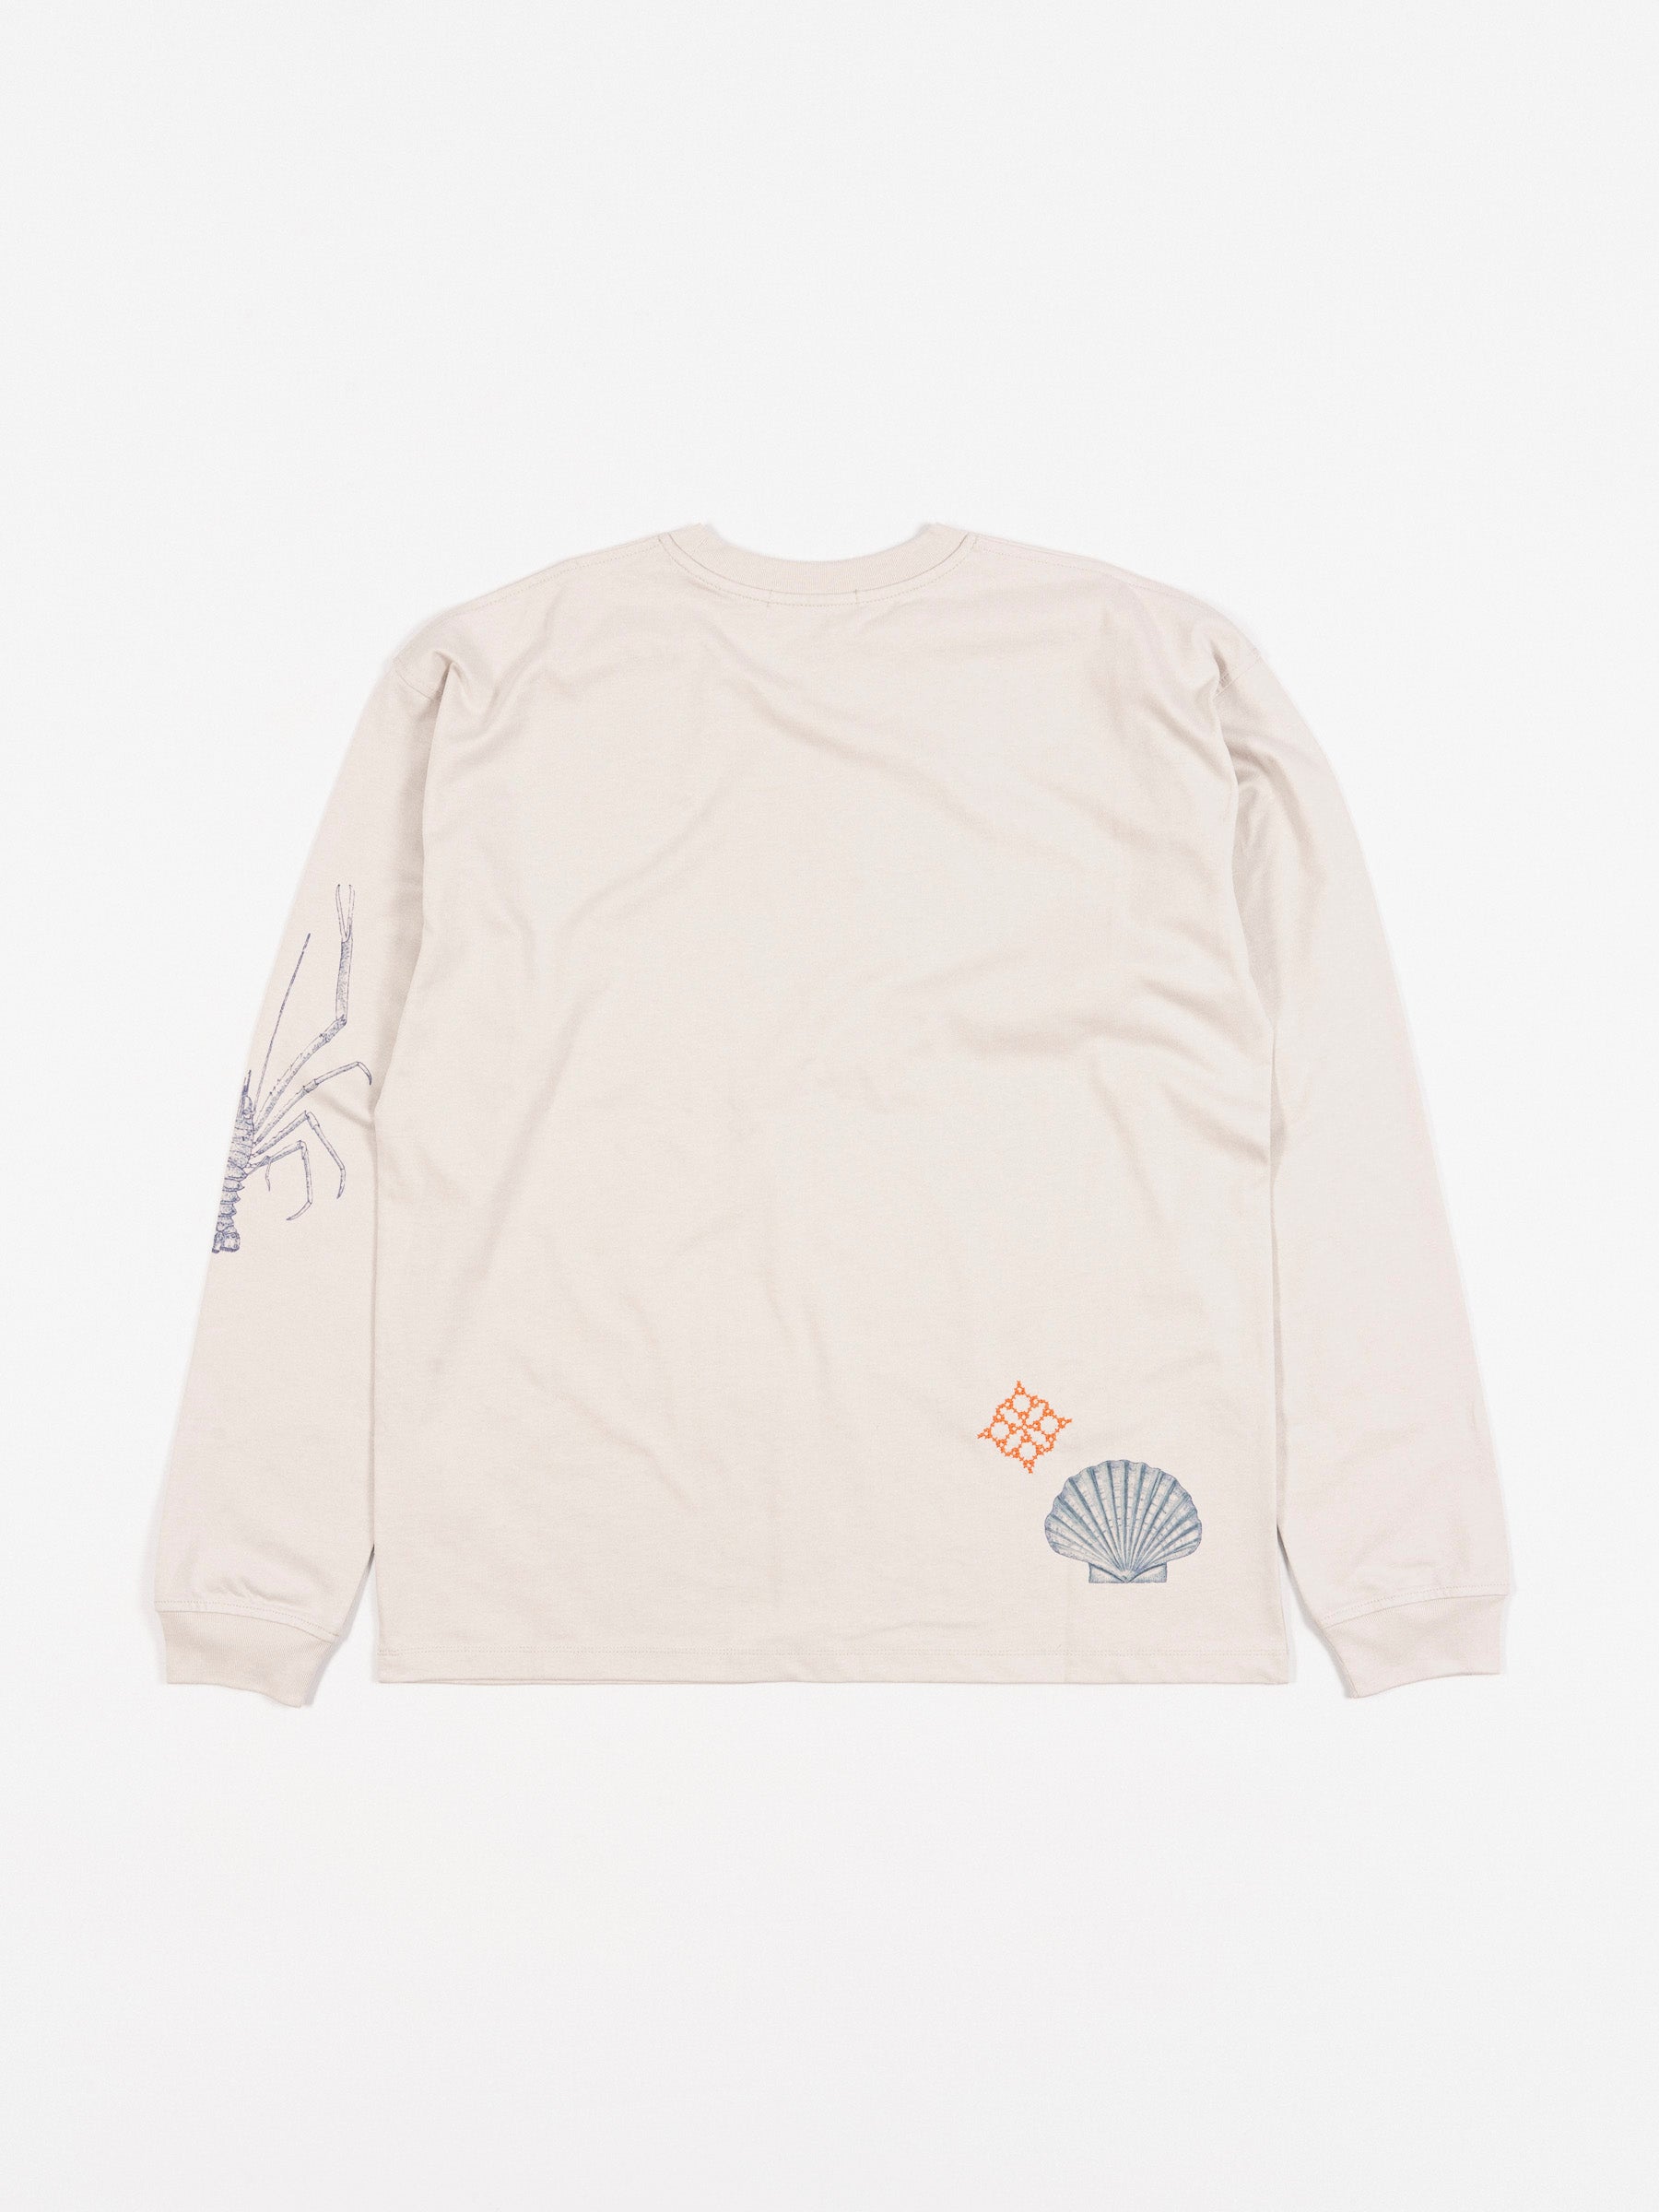 By Small Talk Long Sleeve Tee Off White